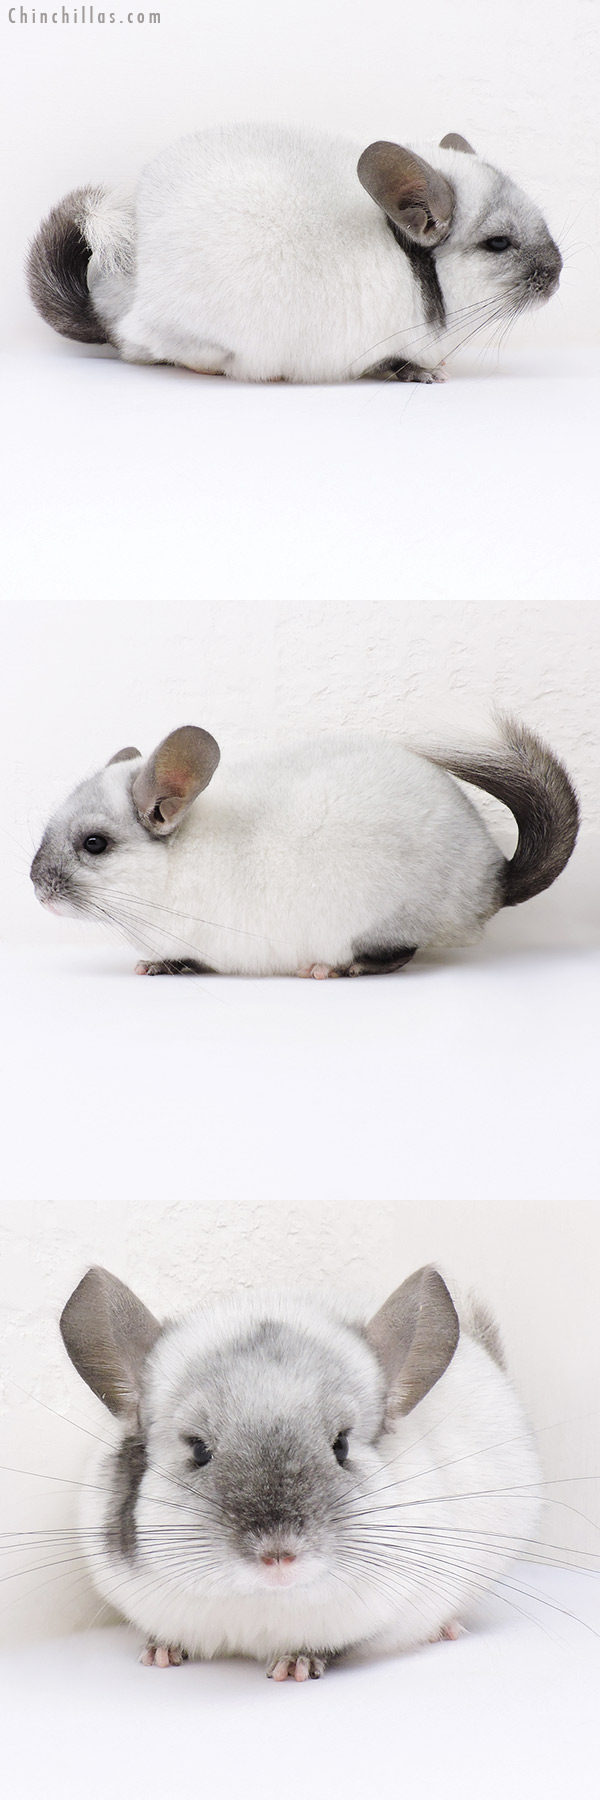 Chinchilla or related item offered for sale or export on Chinchillas.com - 16357 Ebony & White Mosaic ( Locken Carrier ) Female Chinchilla